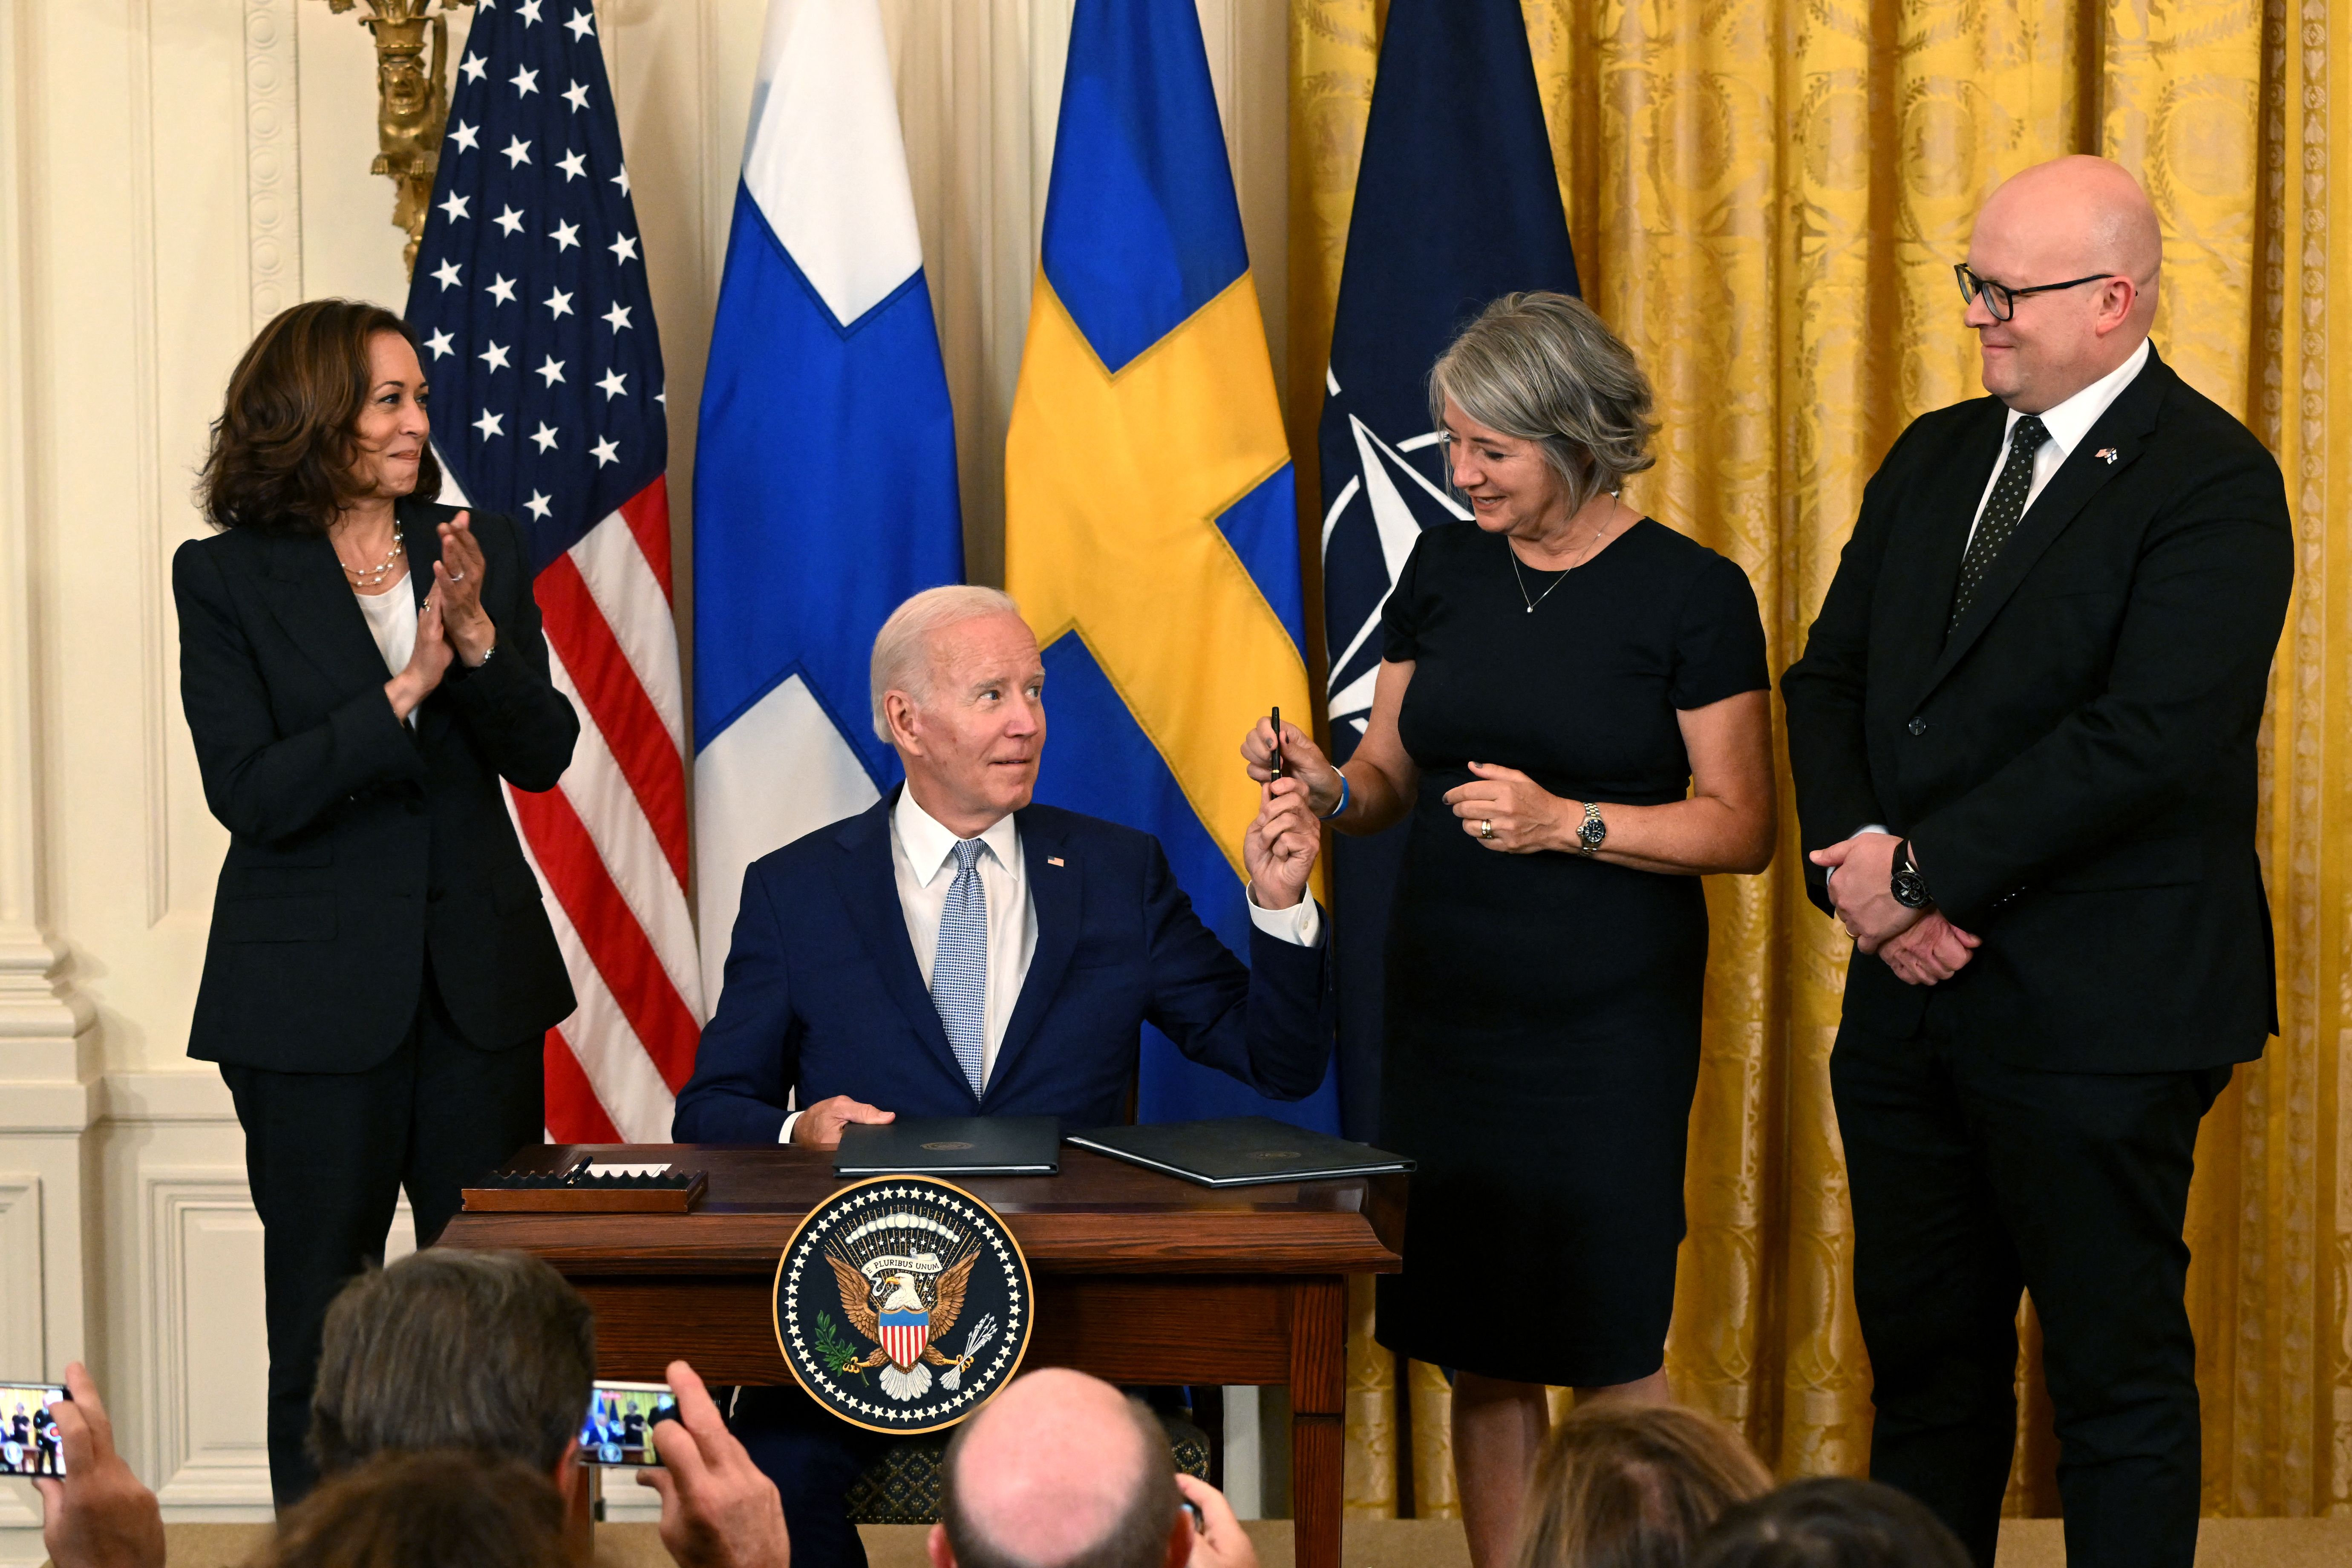 US Vice President Kamala Harris, left, and Ambassador Mikko Hautala, of Finland, right, look on as US President Joe Biden hands a pen to Ambassador Karin Olofsdotter, of Sweden, during a signing ceremony in the East Room of the White House in Washington, DC, on August 9.